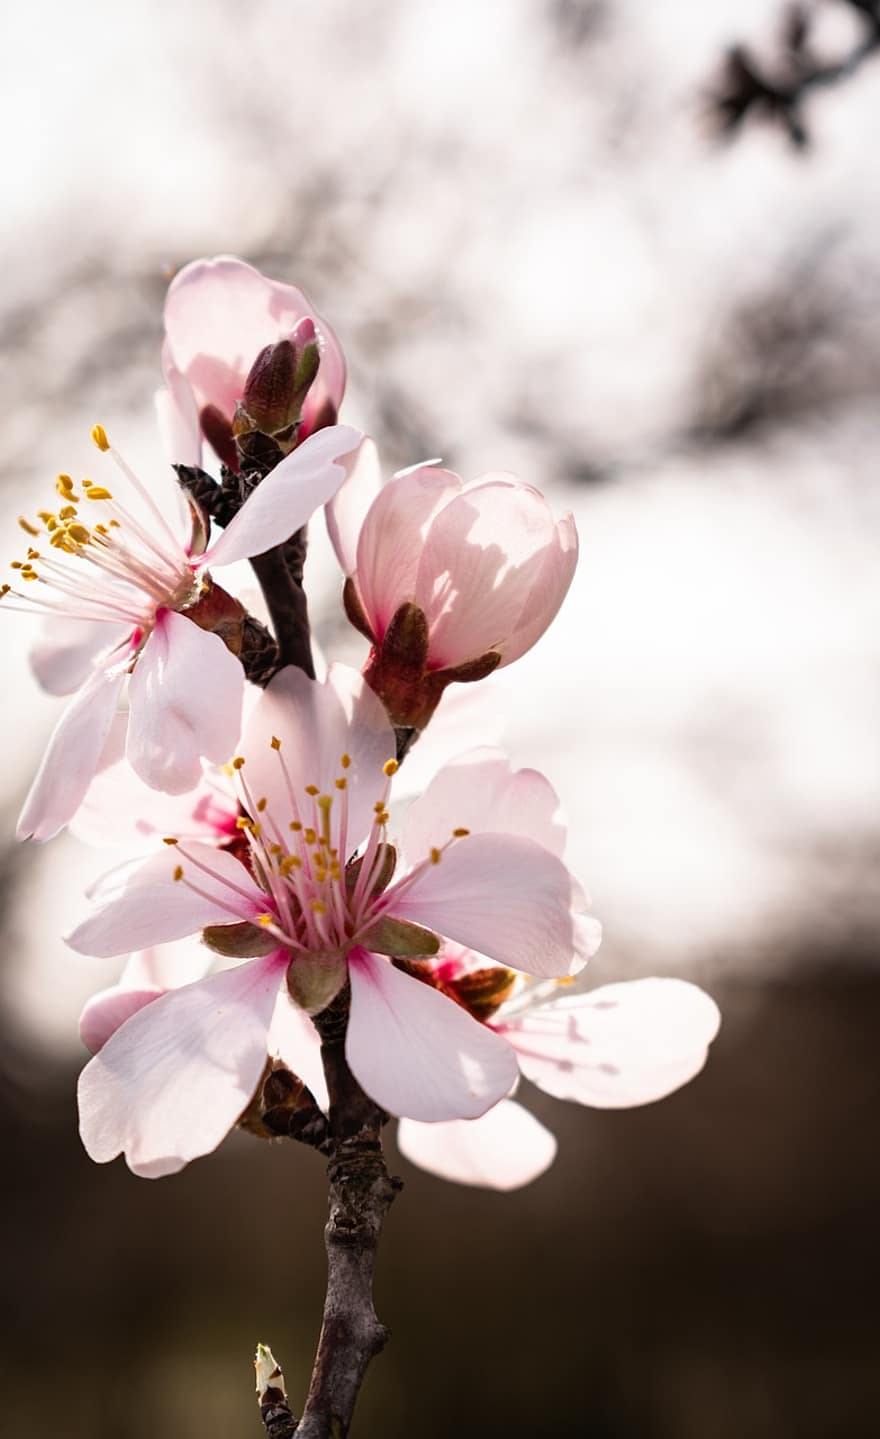 Flowers, Petals, Almond, Spring, Bloom, Blossom, Tree, Branch, Plant, Flowering, Nature